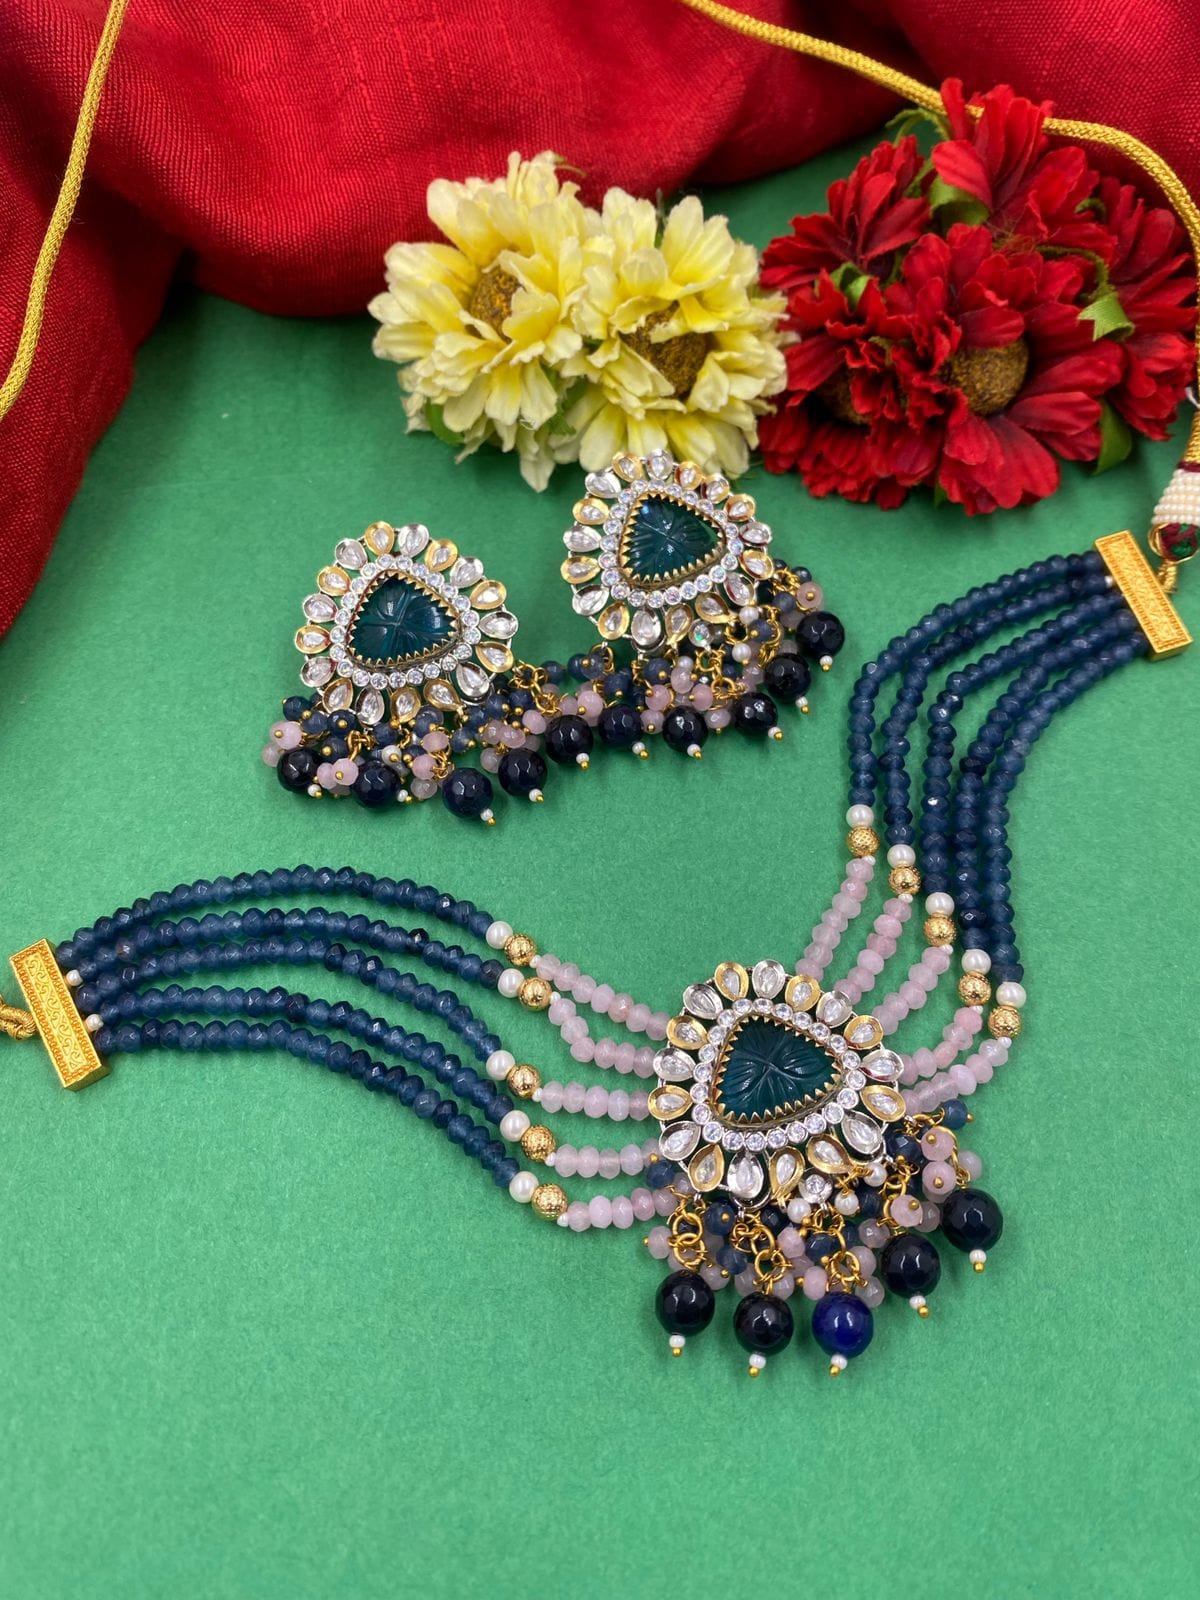 Modern Victorian Kundan And Beads Victorian polish Choker Necklace Set By Gehna Shop Victorian Necklace Sets